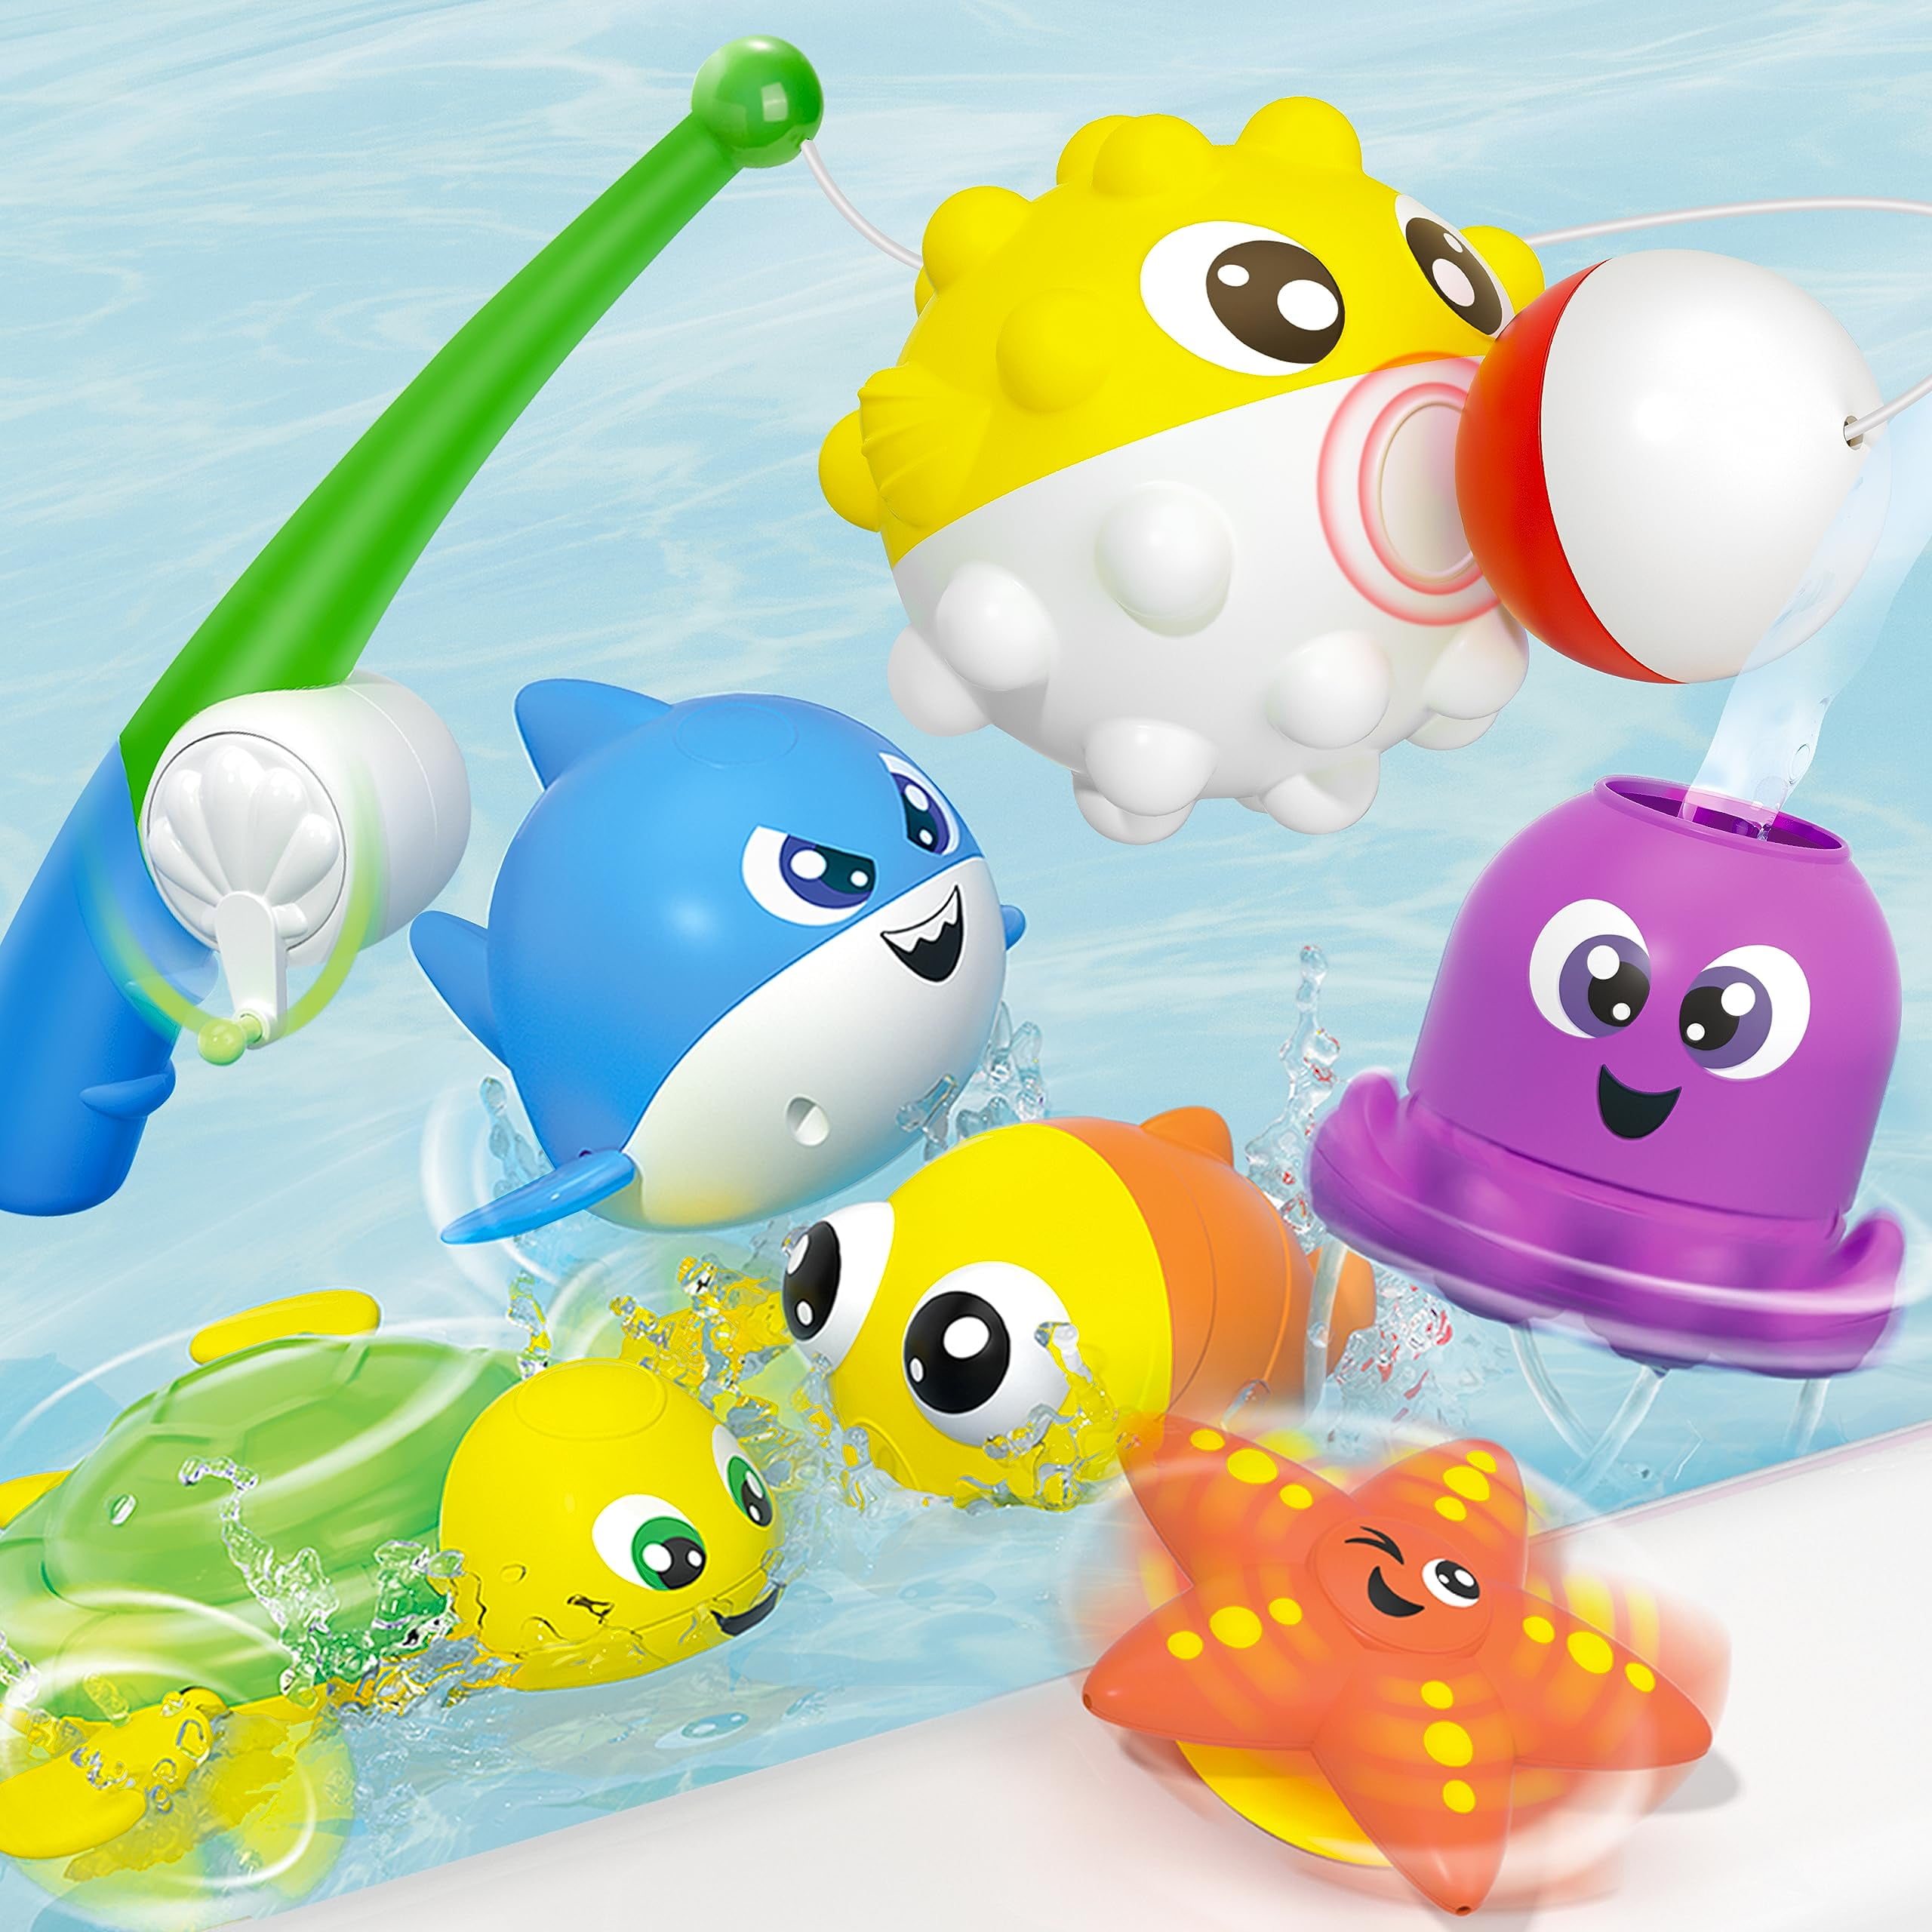 JOYIN Baby Bath Toy Set - Magnetic Fishing Toy with Fishing Rod, Wind-up  Shark and Turtle, Mold-Free Soft Puffer & Clown Fish, Spinning Octopus and  Starfish - Sensory Development for Infants 